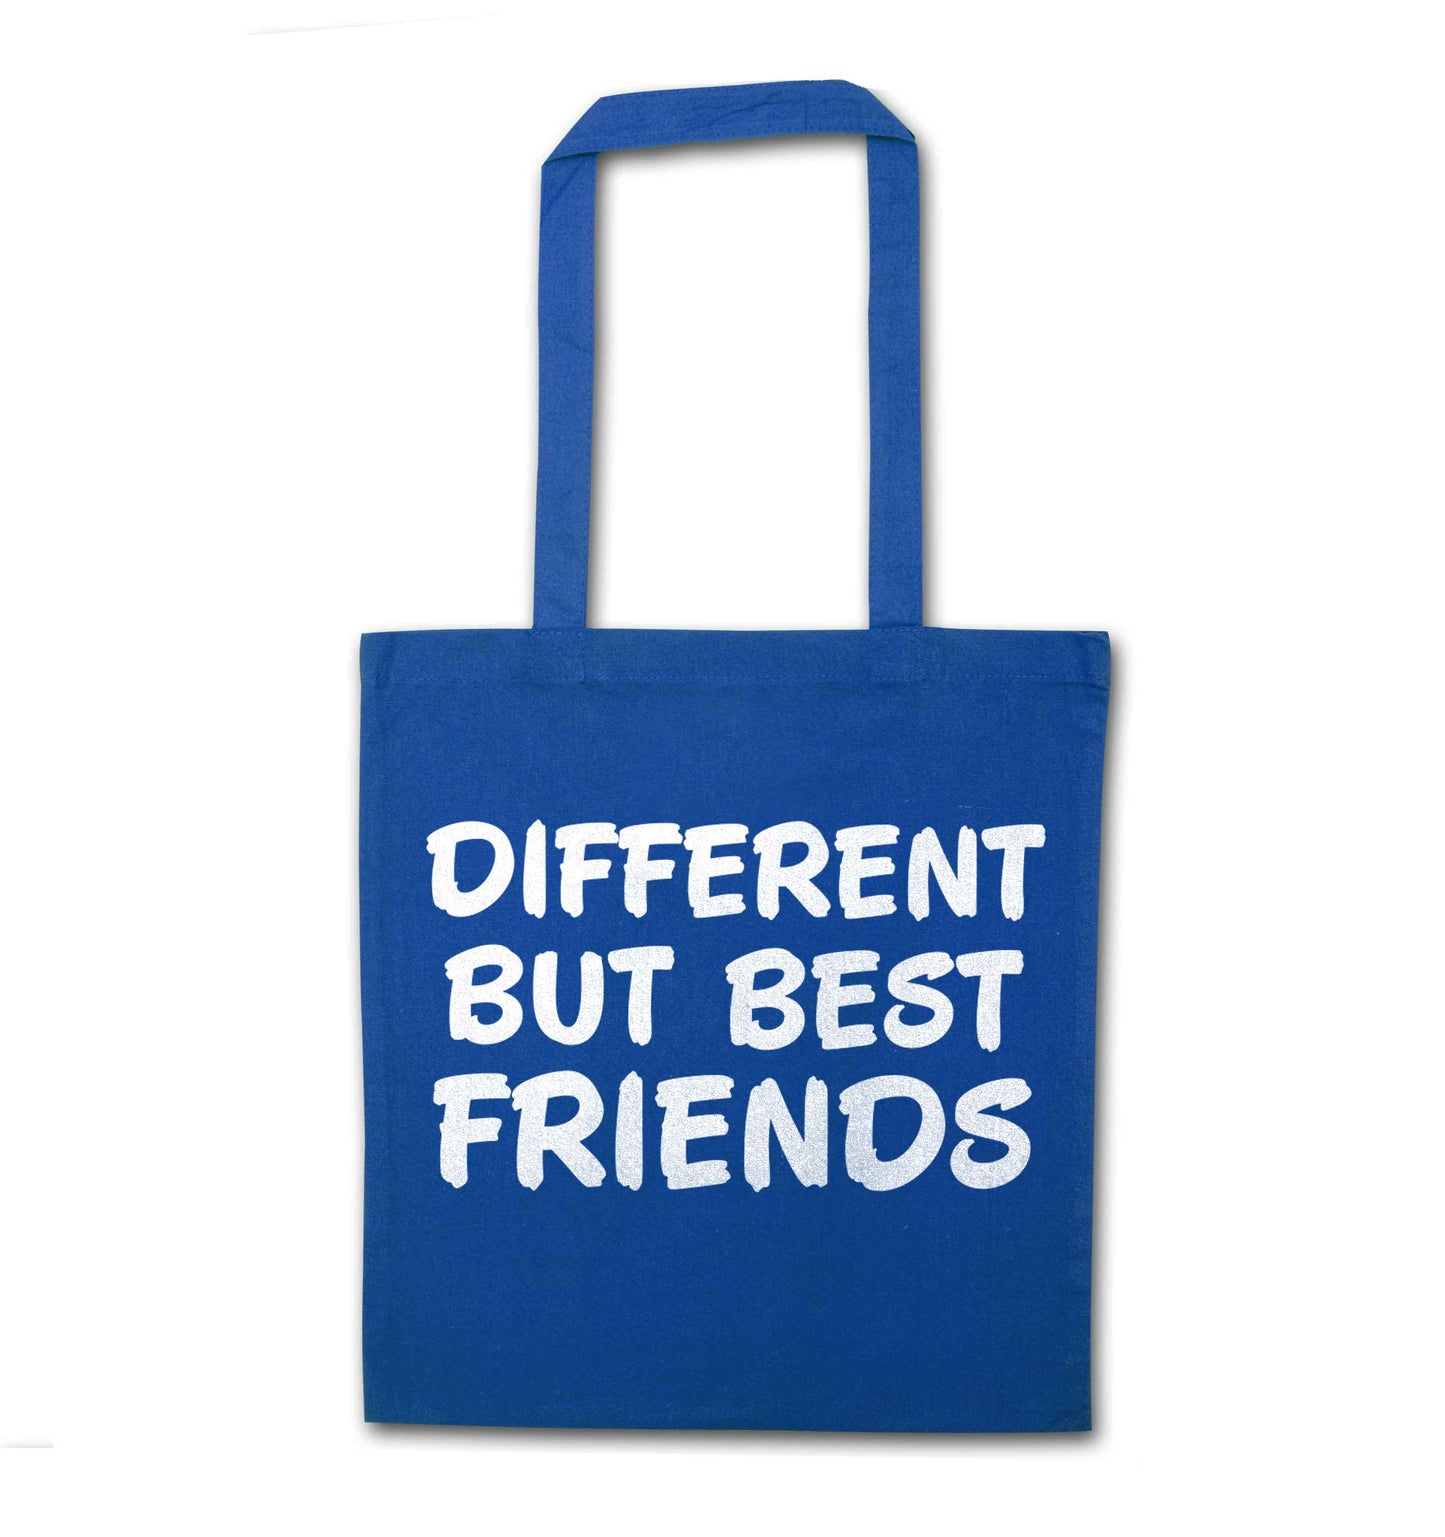 Different but best friends blue tote bag